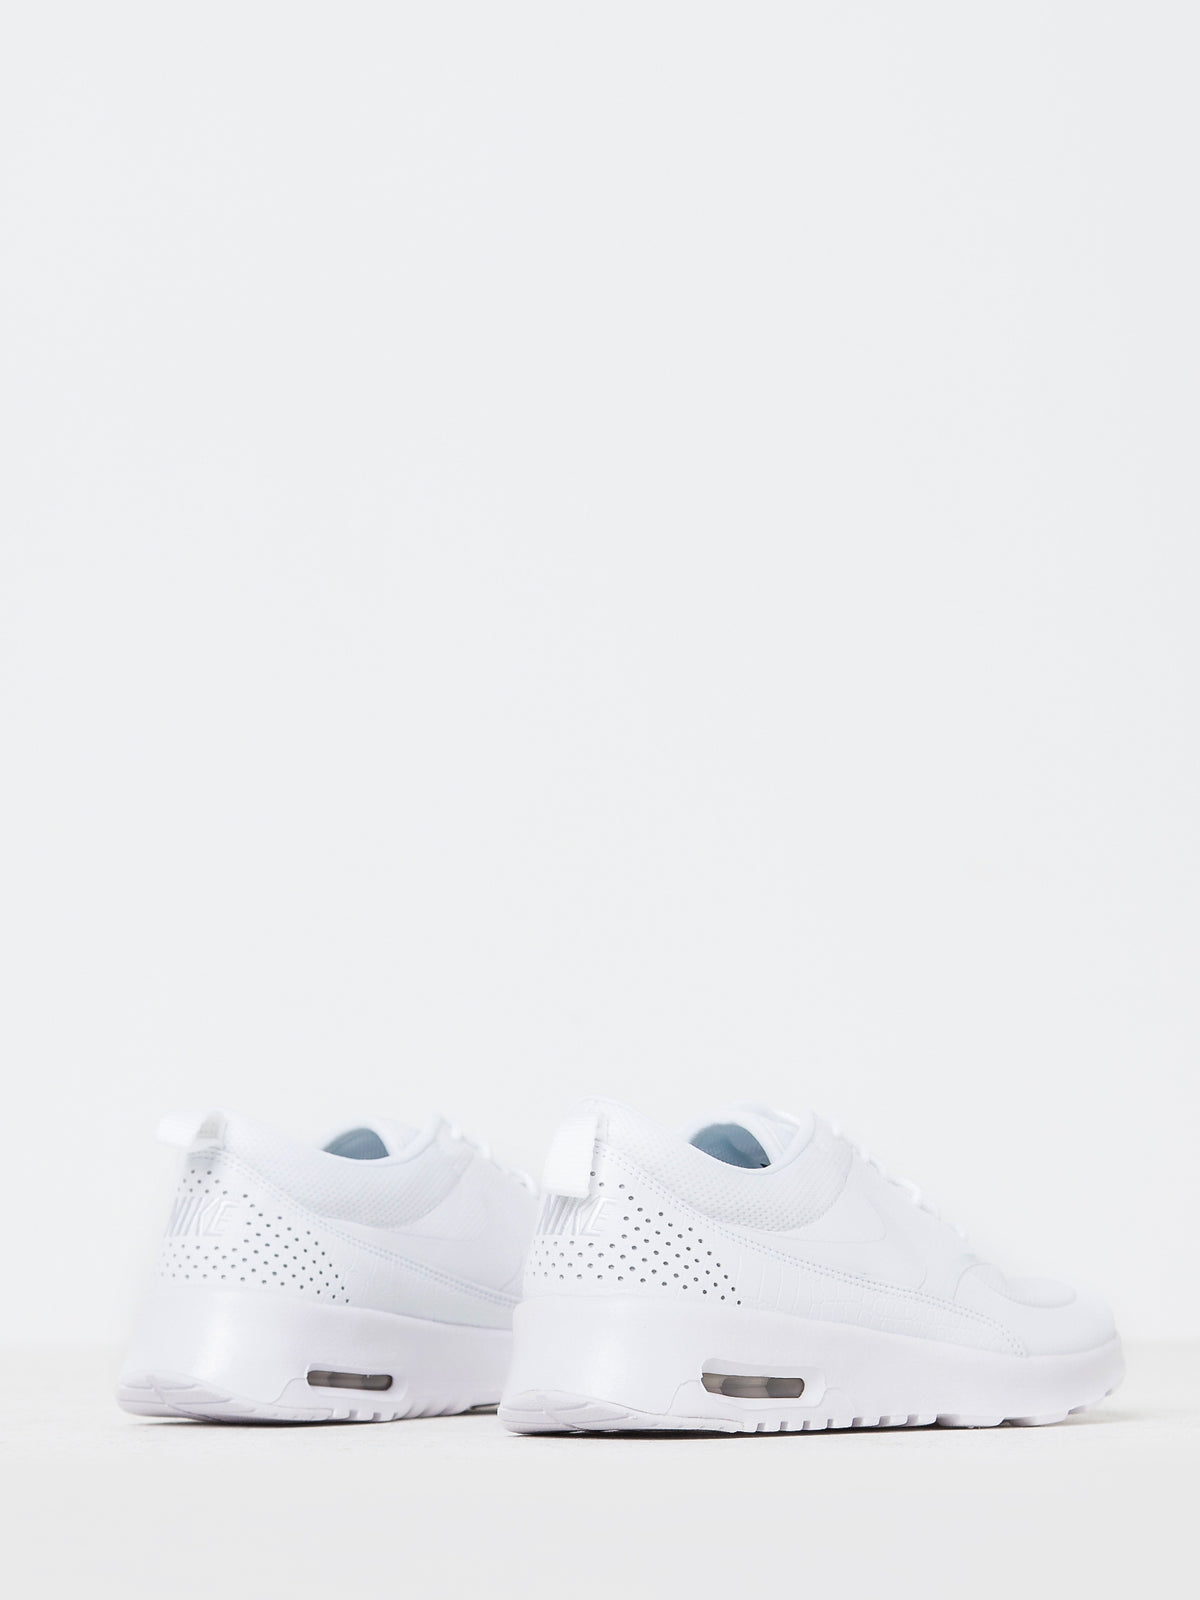 Womens Air Max Thea Sneakers in White